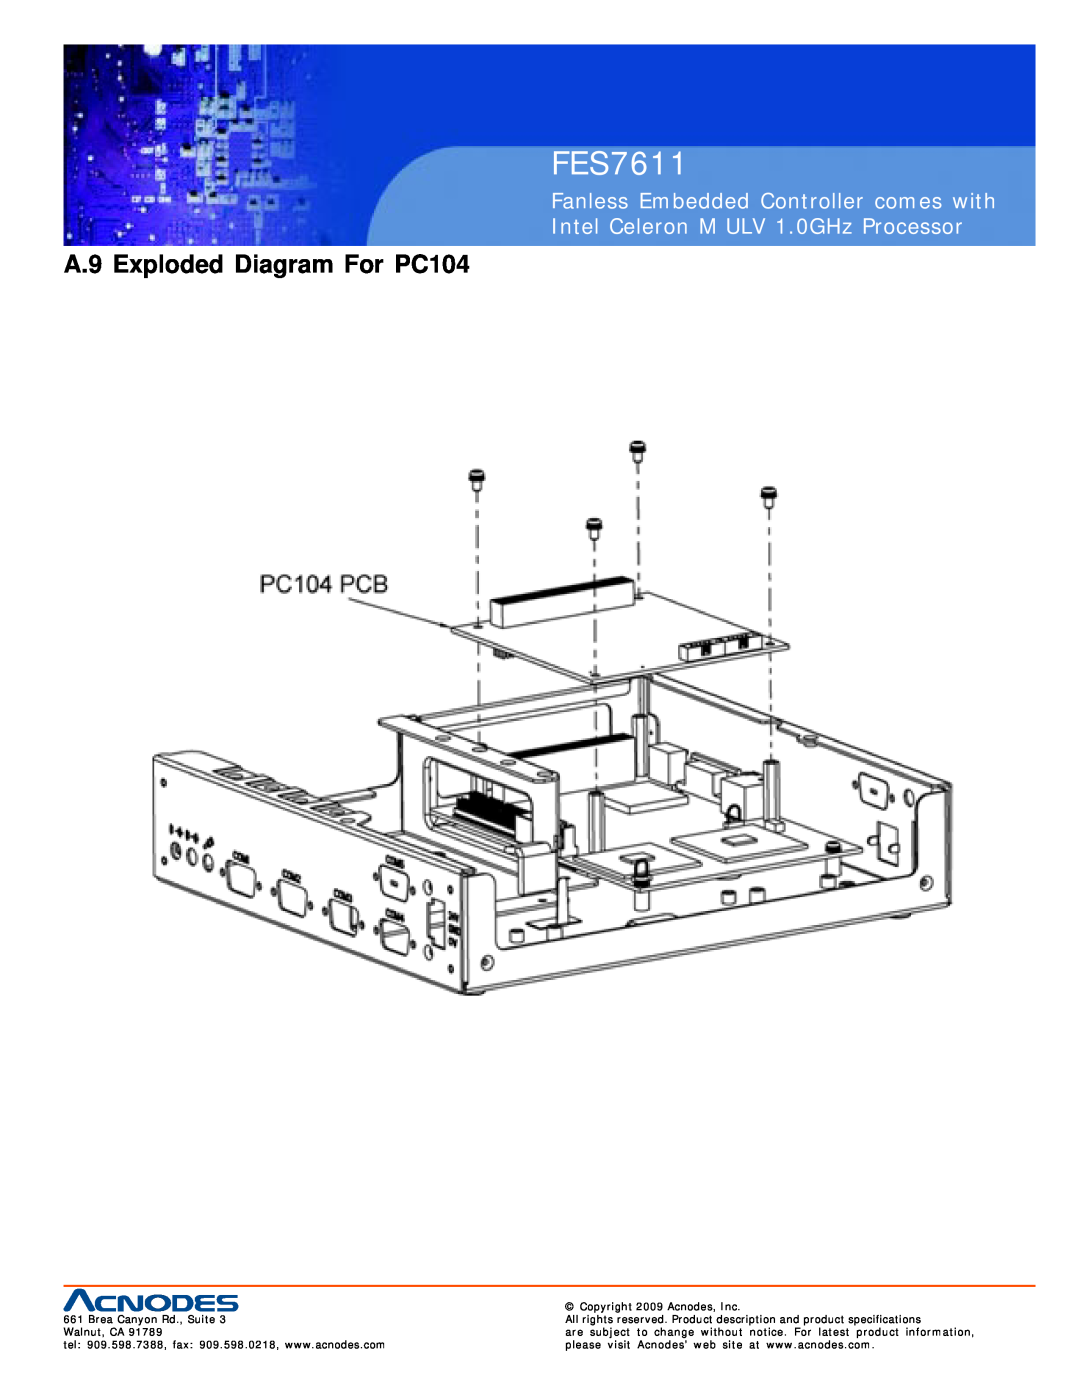 Acnodes FES7611 A.9 Exploded Diagram For PC104, Fanless Embedded Controller comes with, Copyright 2009 Acnodes, Inc 